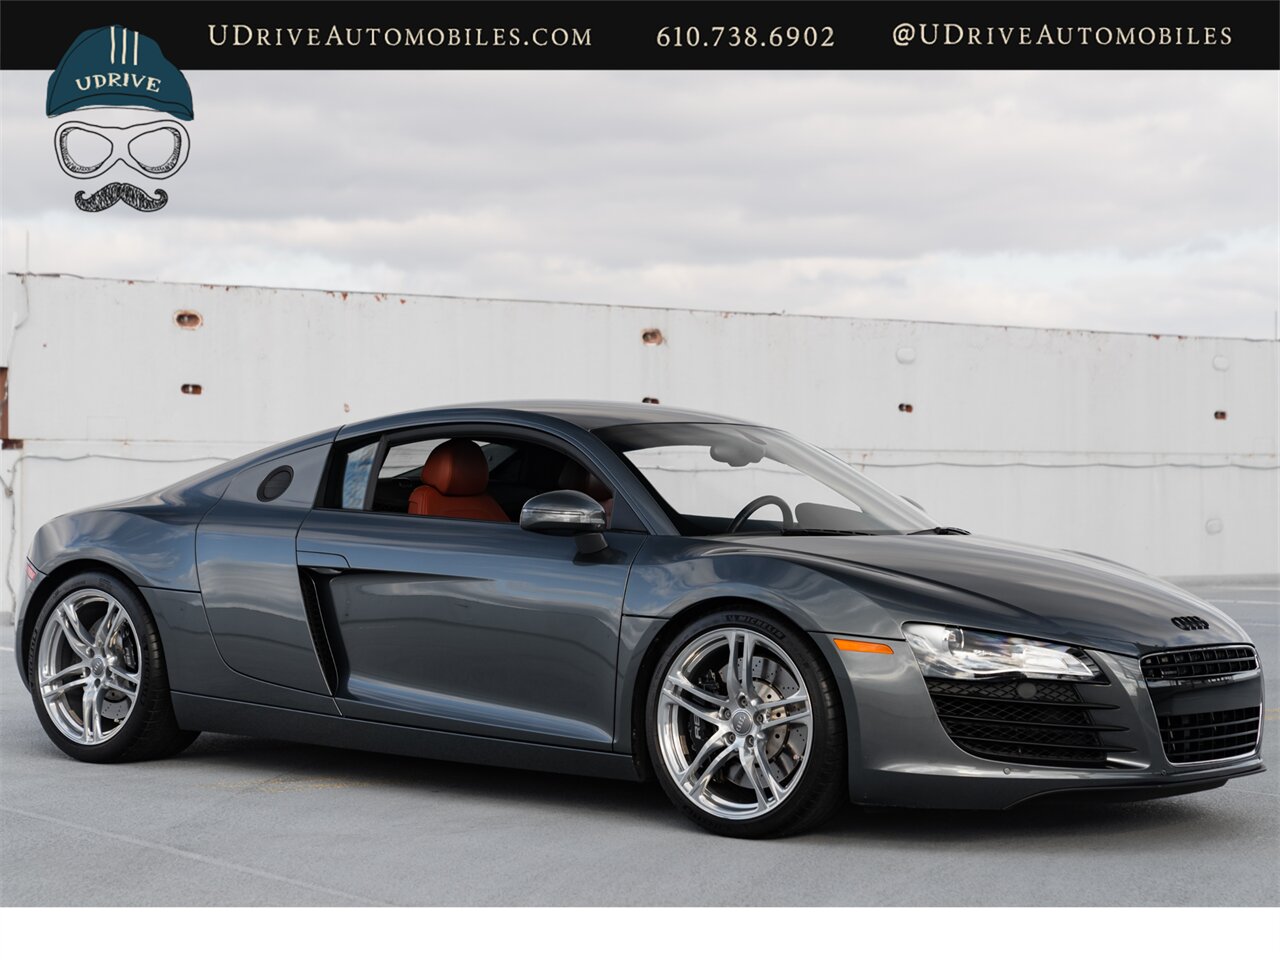 2009 Audi R8 Quattro  4.2 V8 6 Speed Manual 15k Miles - Photo 17 - West Chester, PA 19382